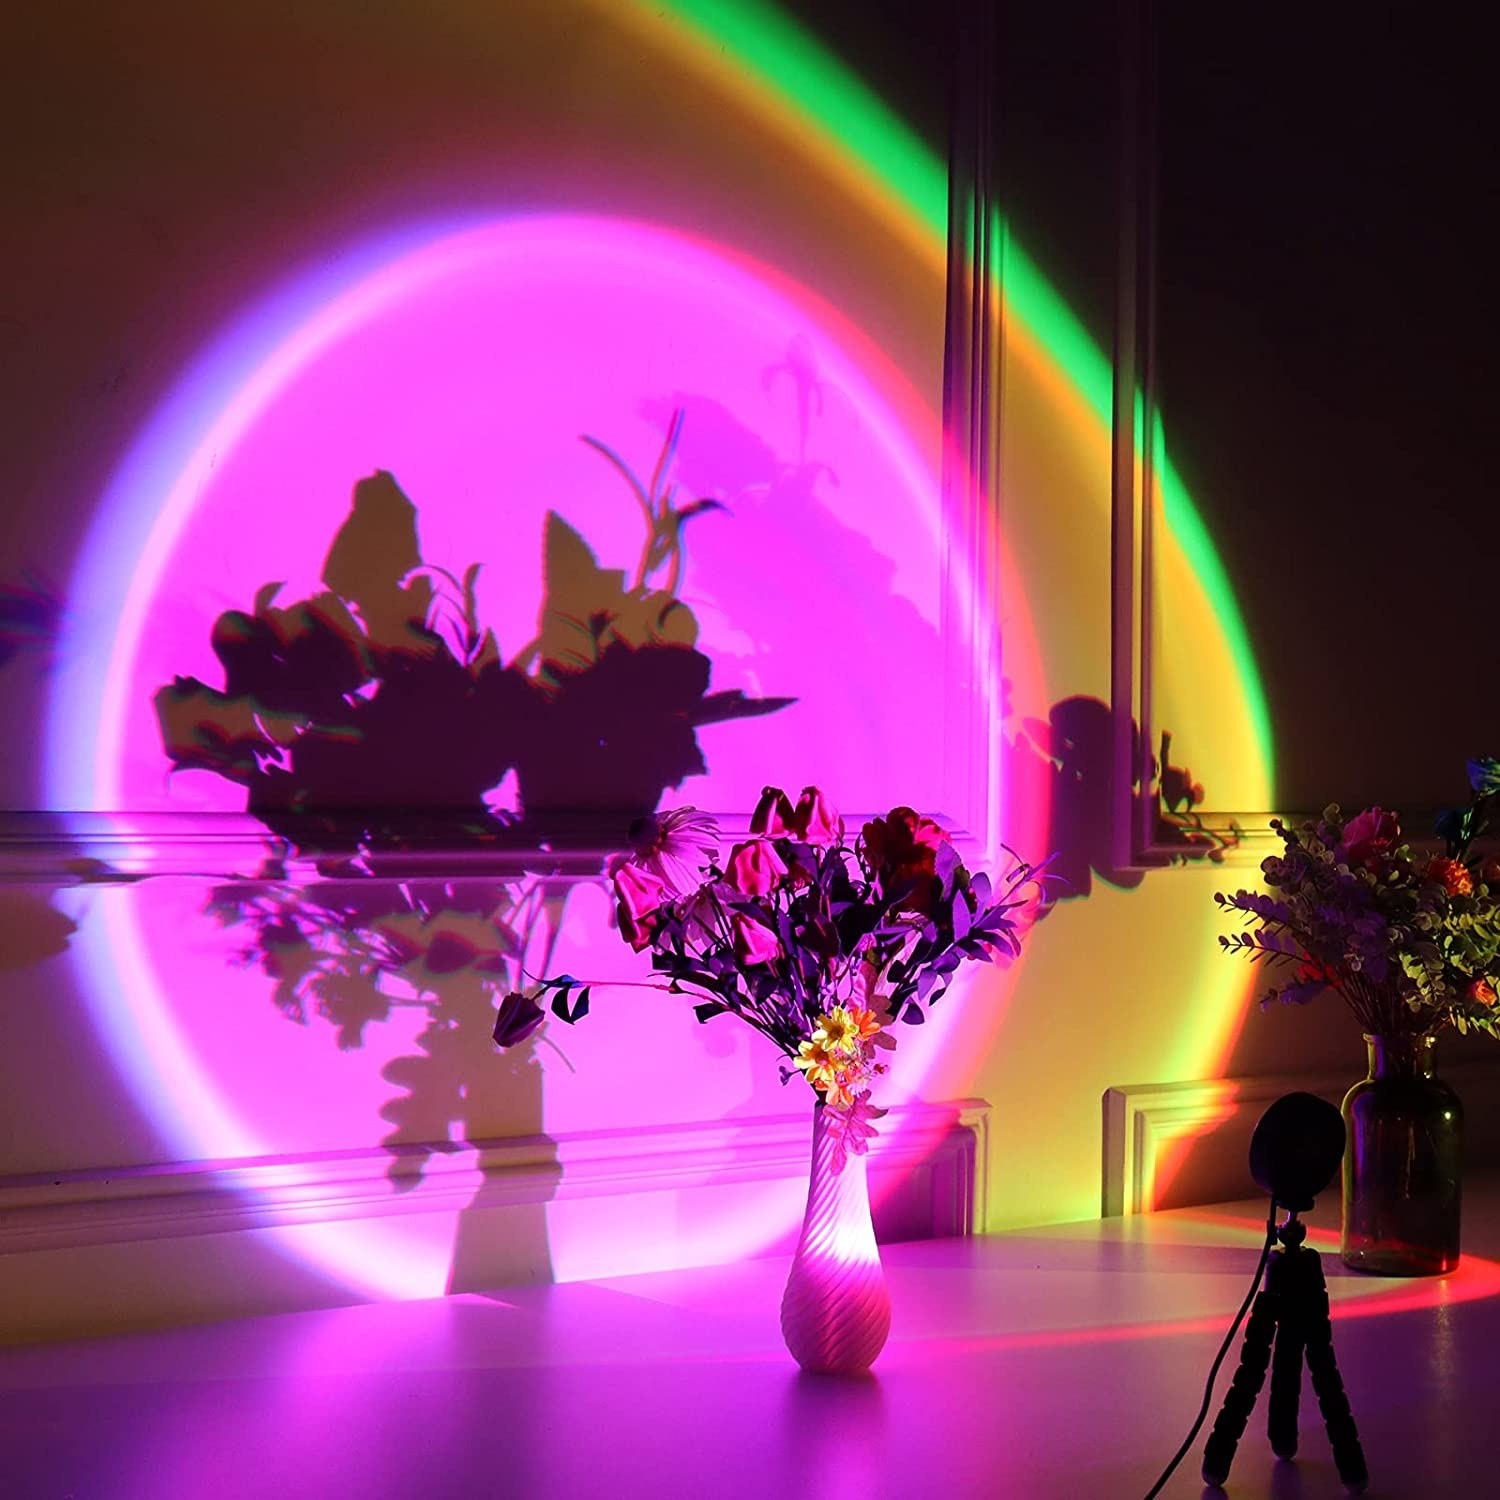 The sunset light projecting a circle of light on a vase of flowers